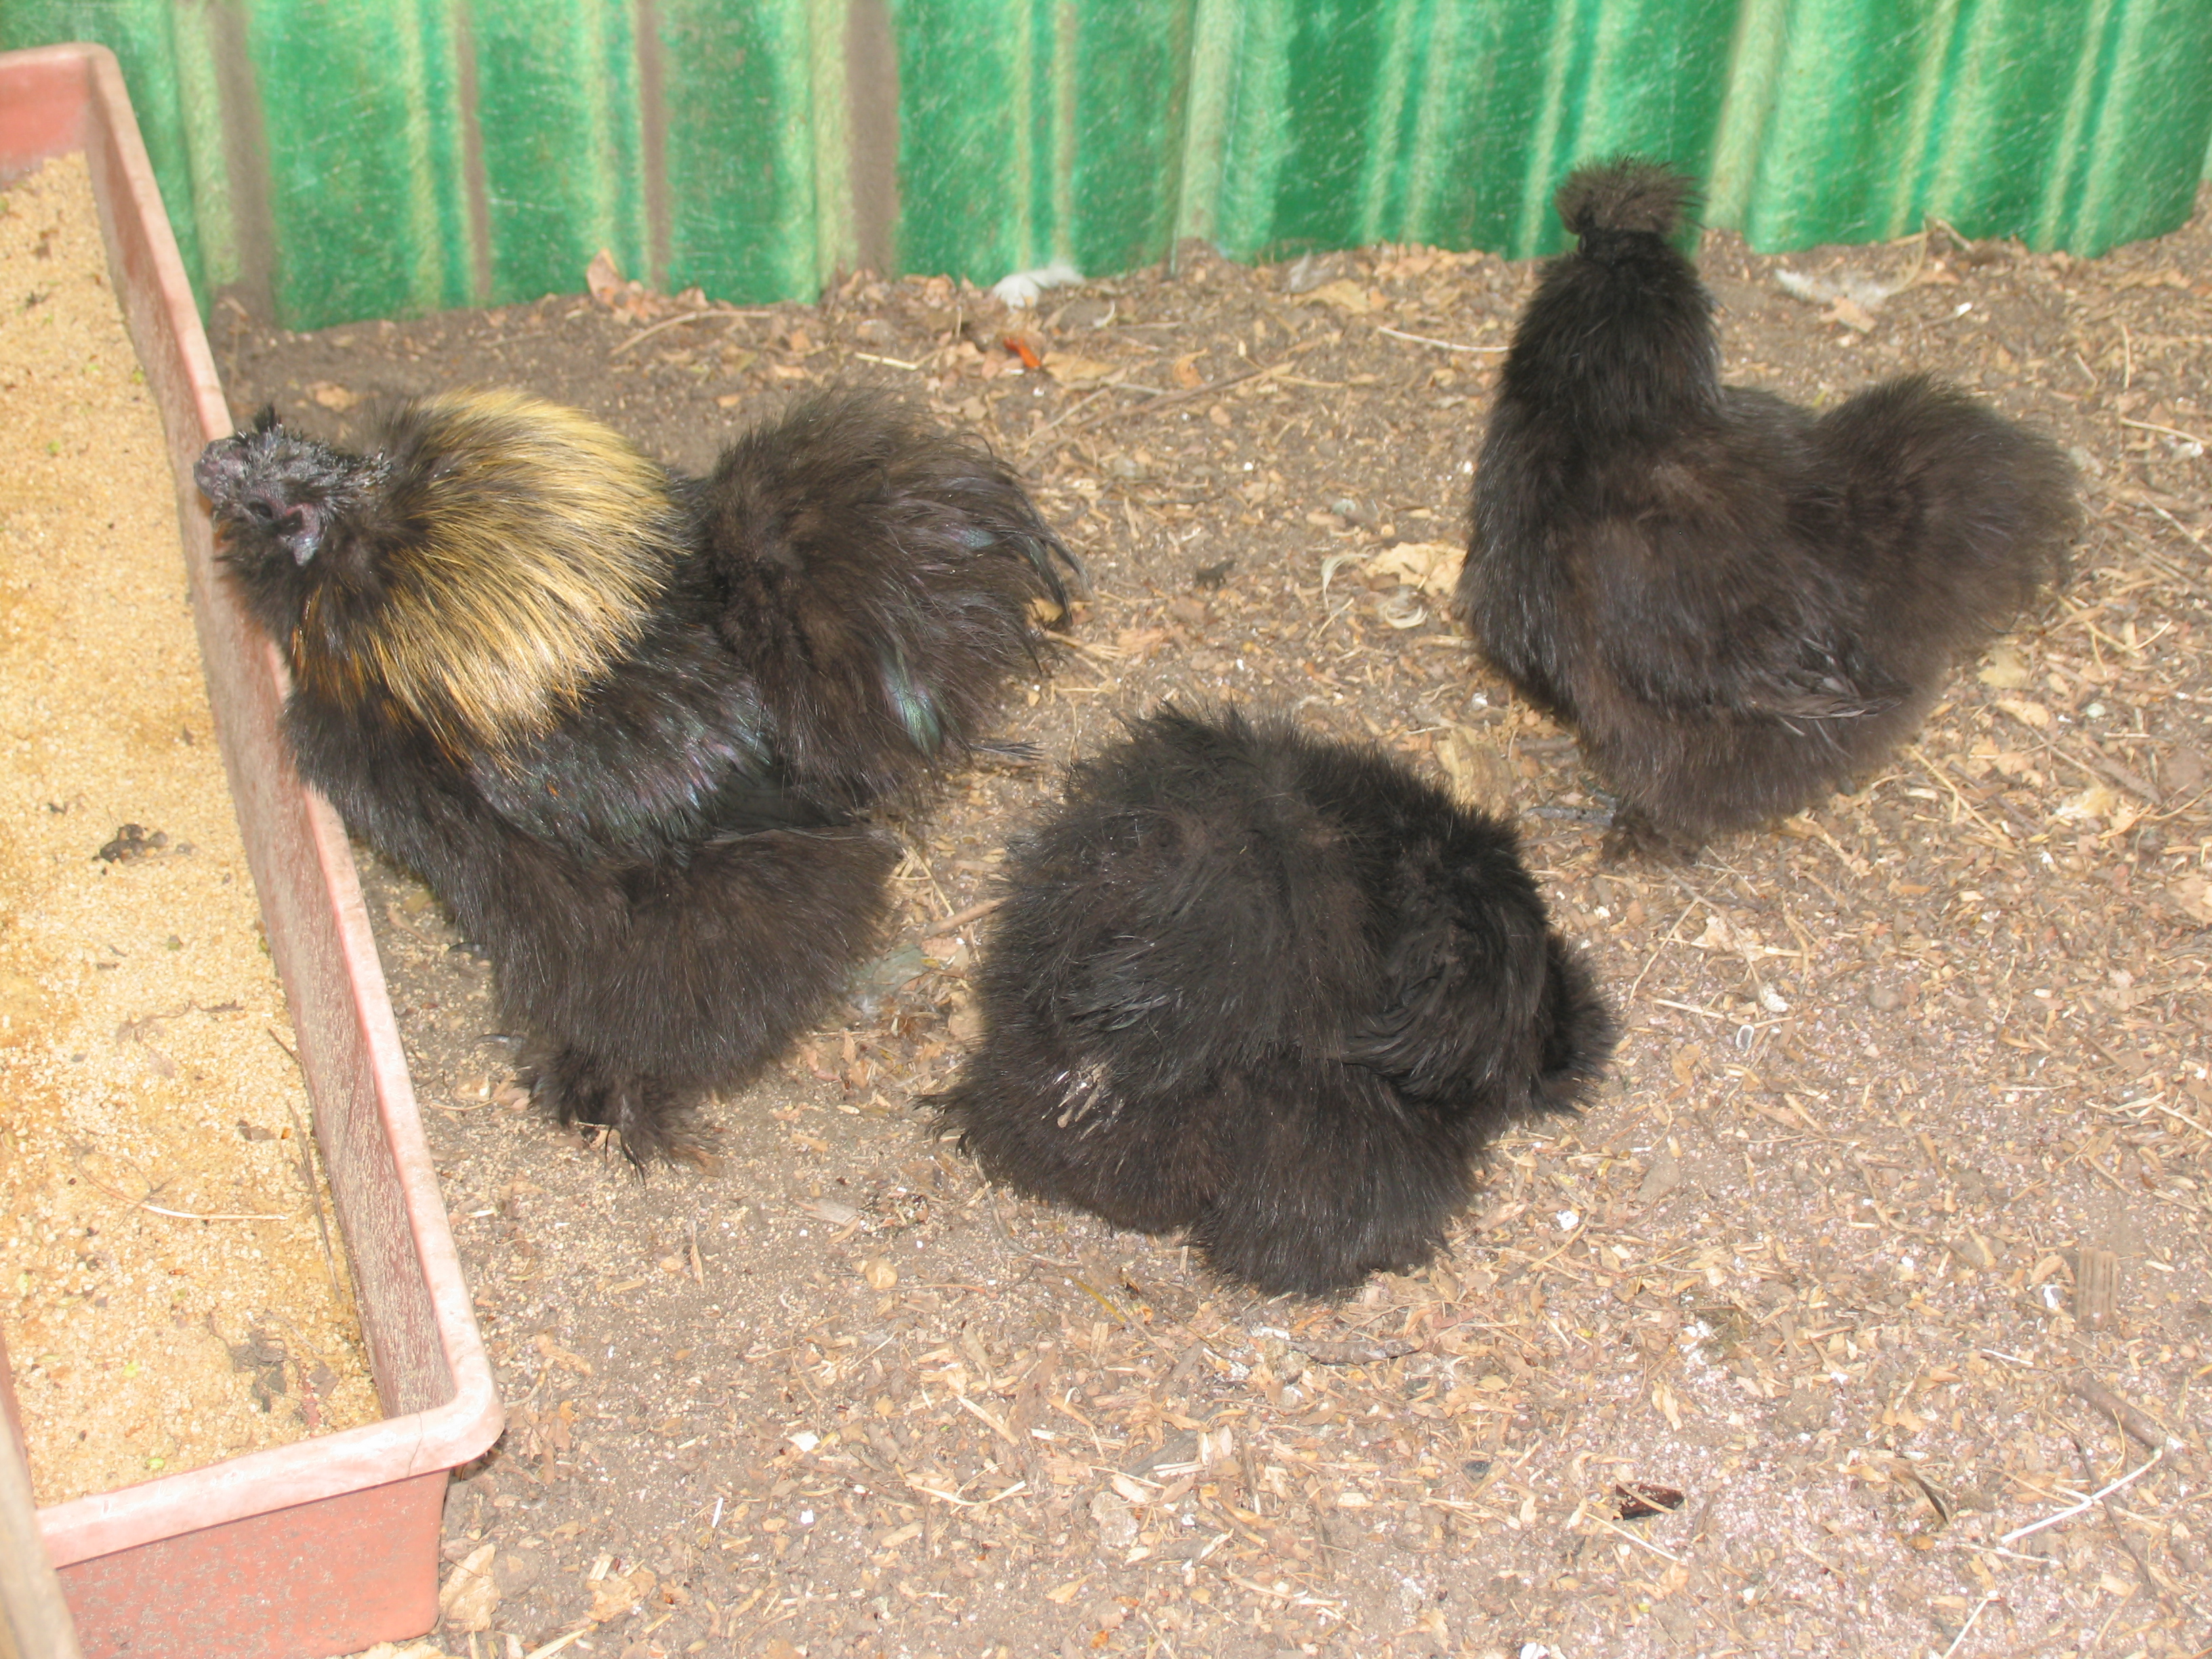 My silkie pullets and Rooster (gold pencilling on black)